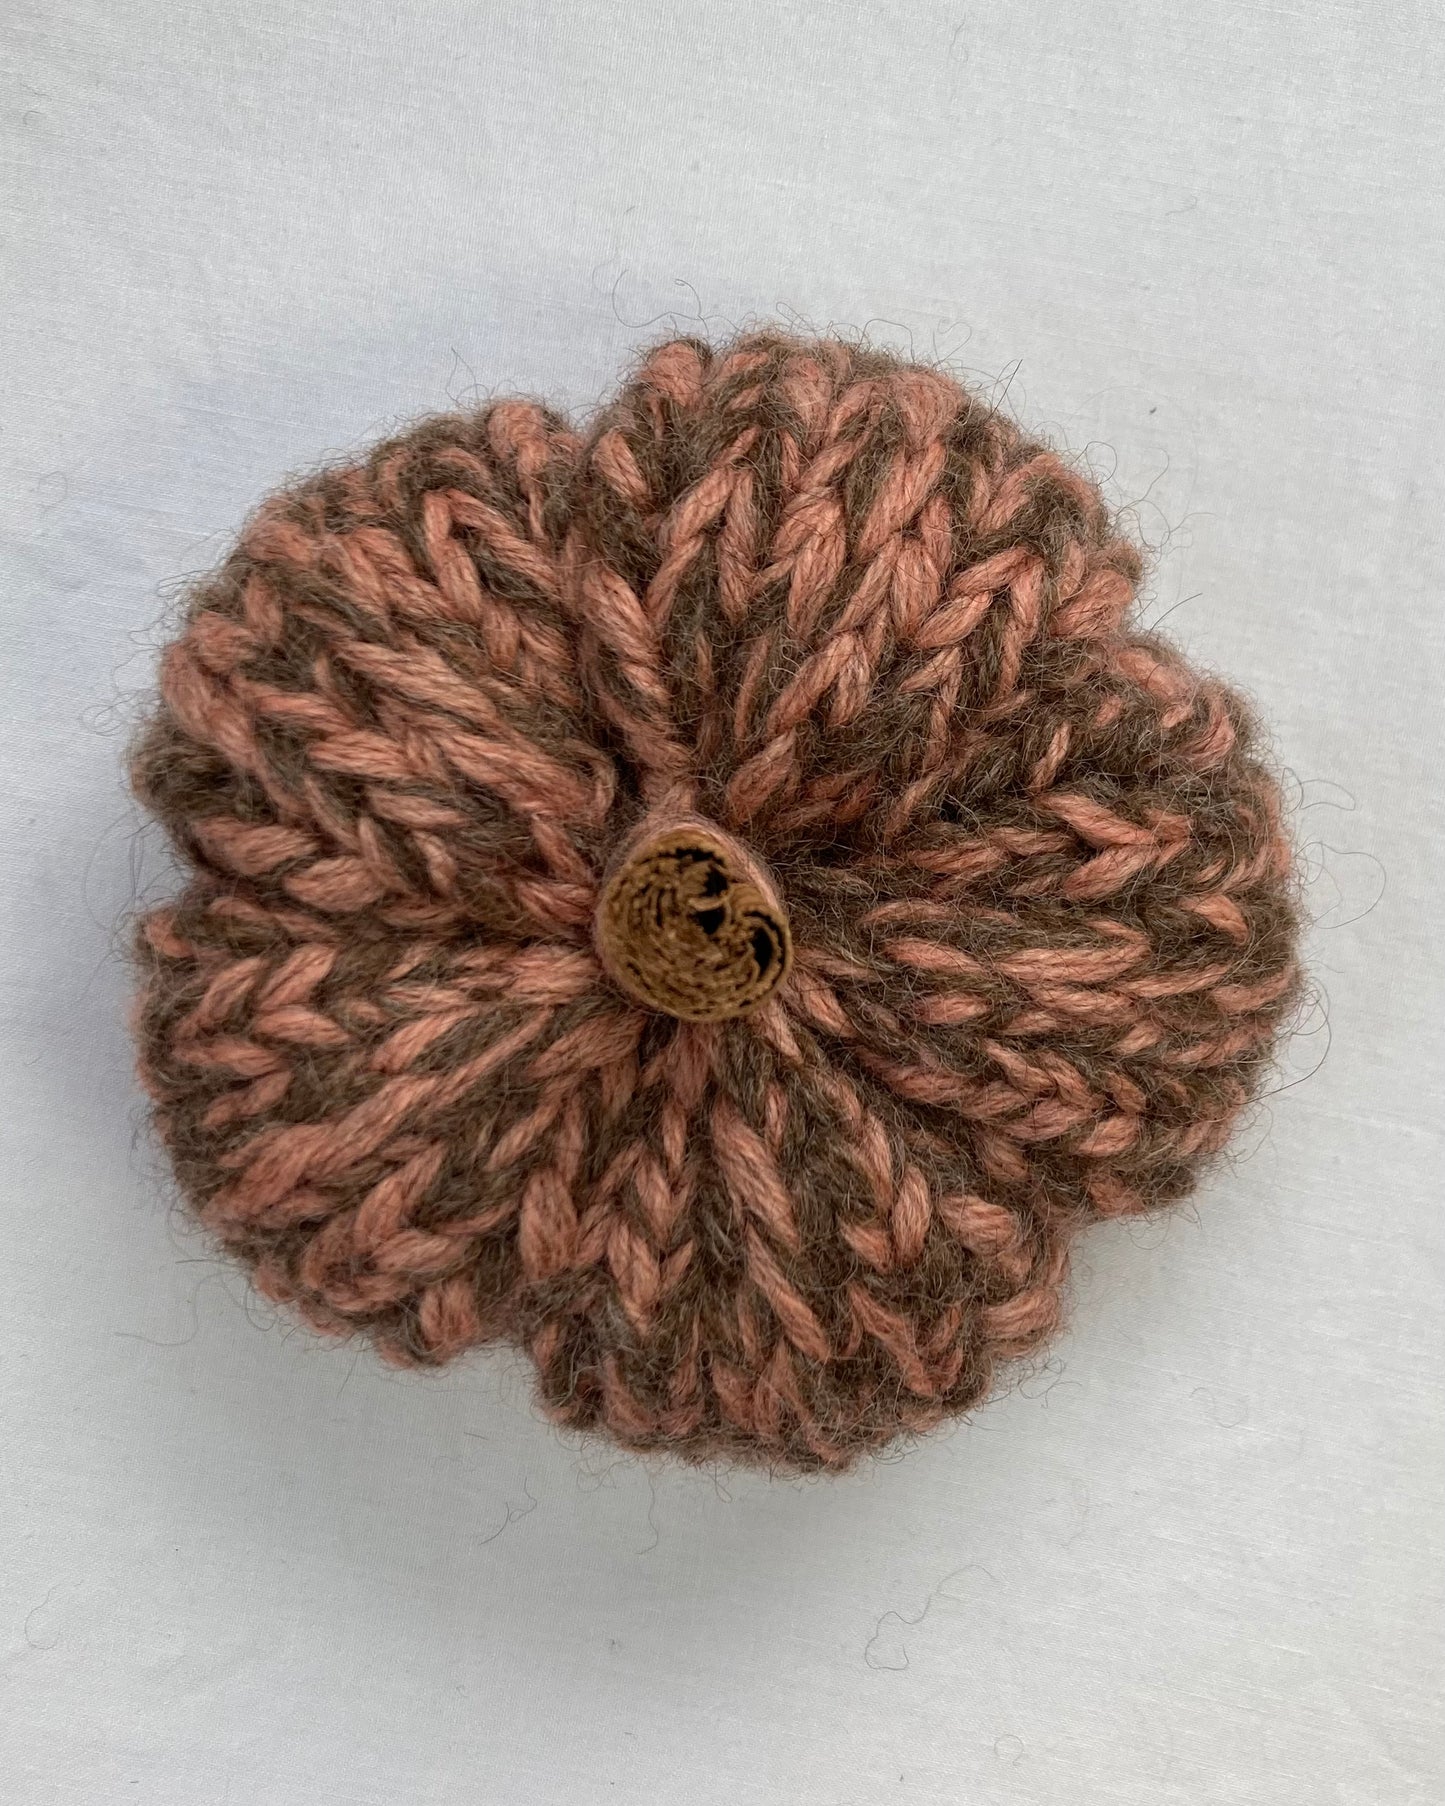 Plant-Dyed Knitted Pumpkin